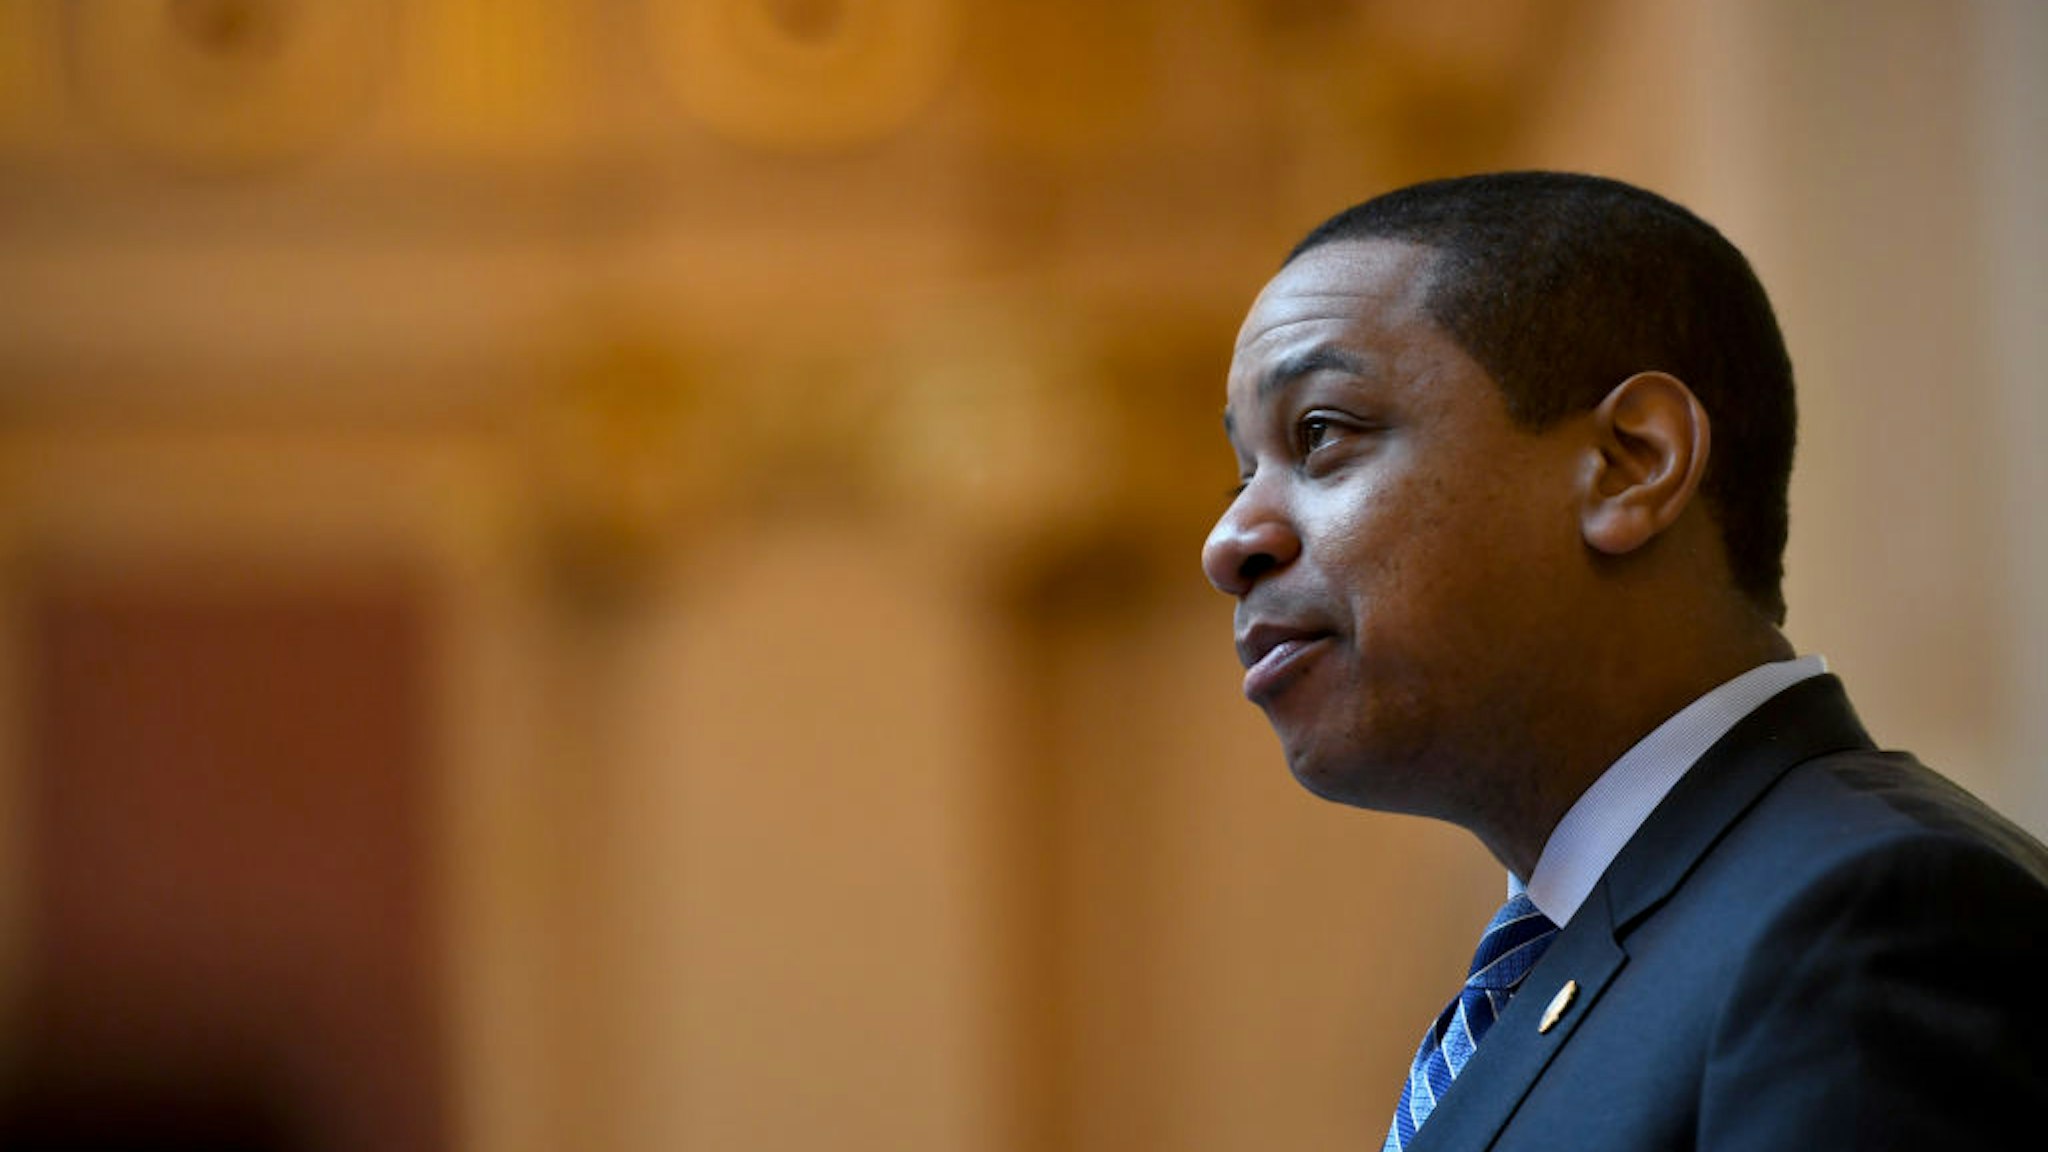 Virginia Lt. Gov. Justin Fairfax presides over the Senate proceedings February 08, 2019 in Richmond, VA. Facing two sexual assault allegations, Fairfax has called for an investigation saying the acts were consensual.